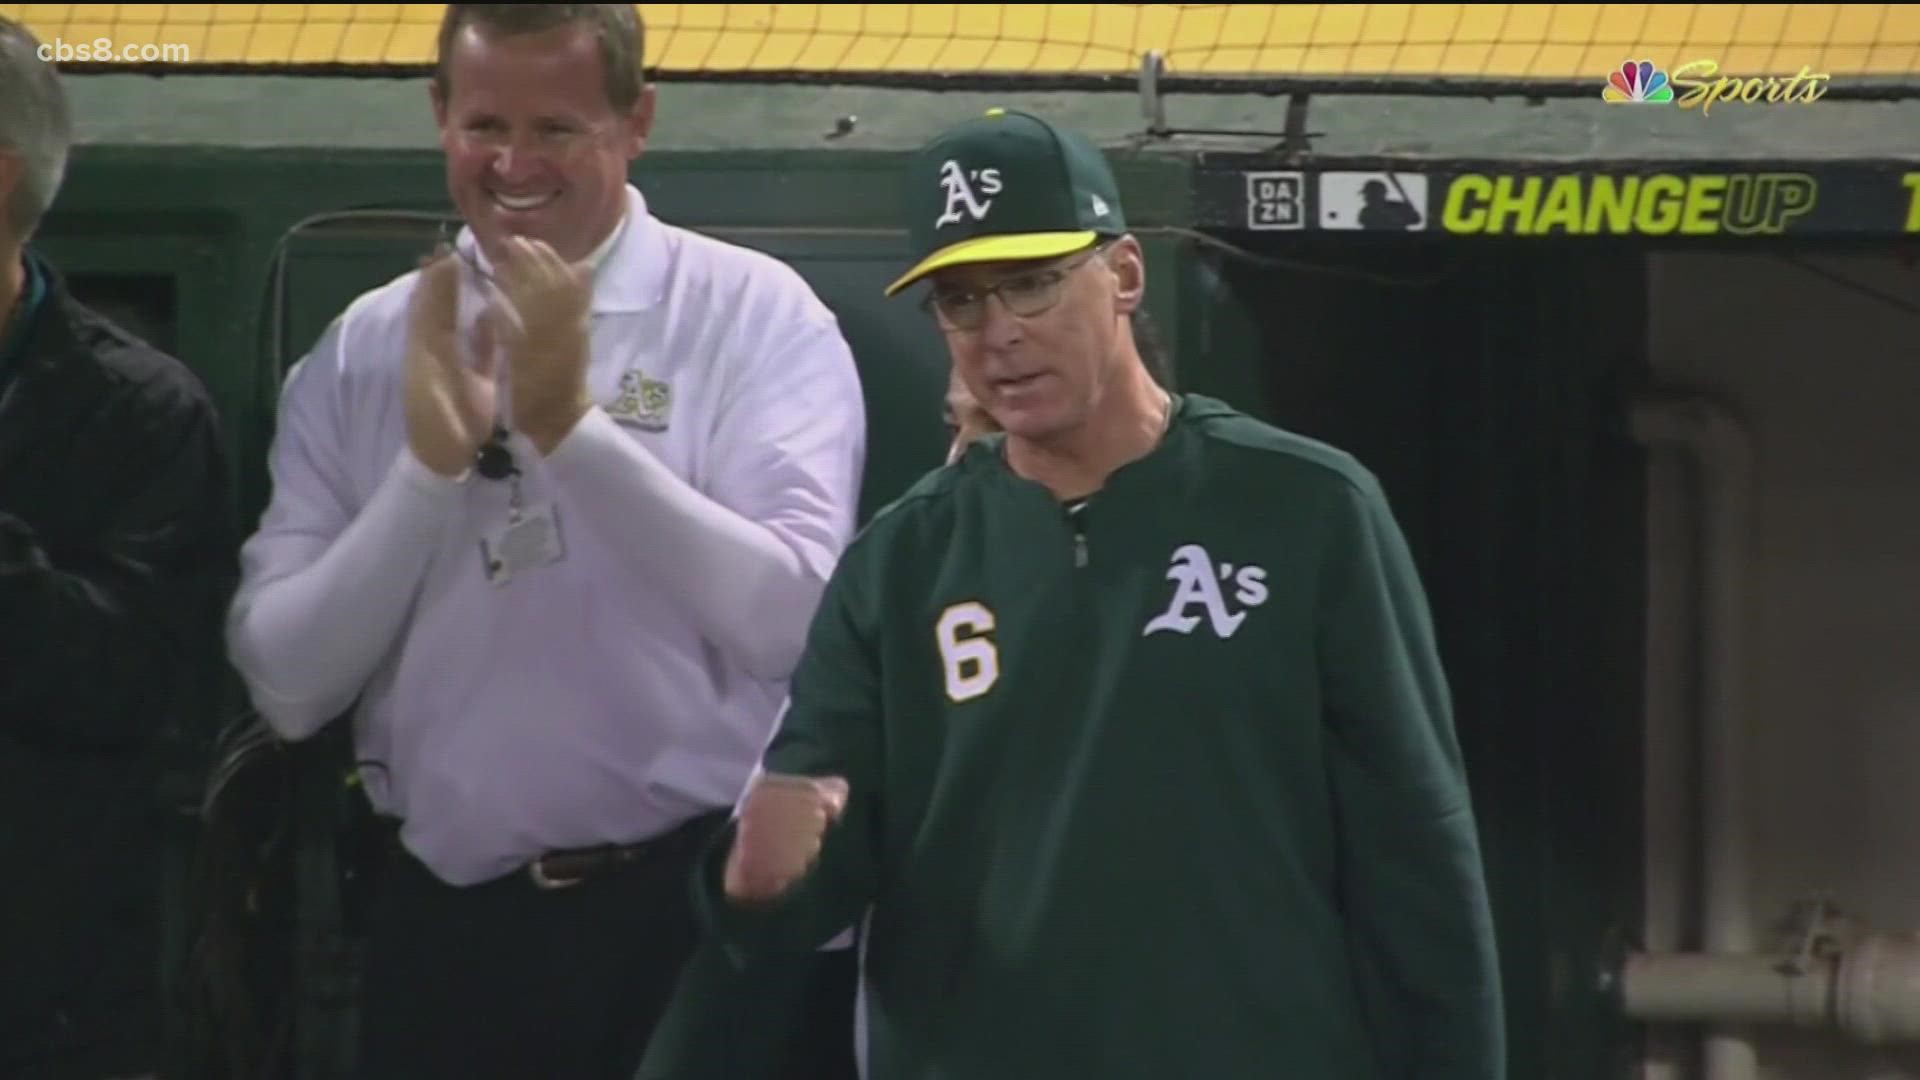 Melvin, who turned 60 the day the news came down, spent more than a decade as skipper for the Oakland A's.